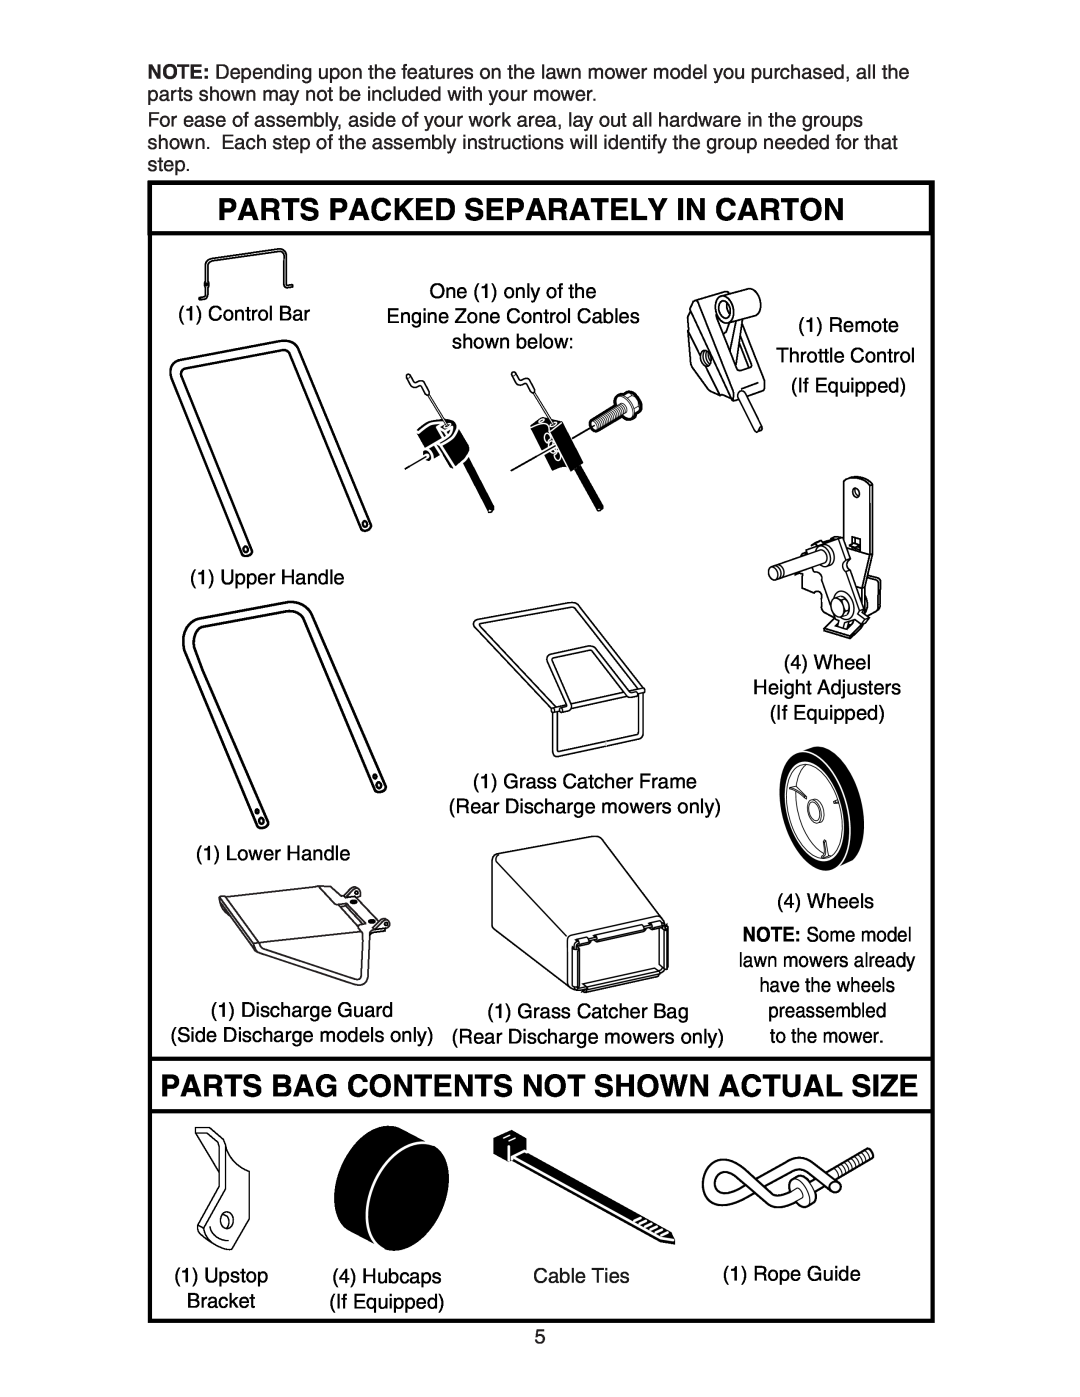 Poulan 193747 manual Parts Packed Separately In Carton, Parts Bag Contents Not Shown Actual Size, Cable Ties 